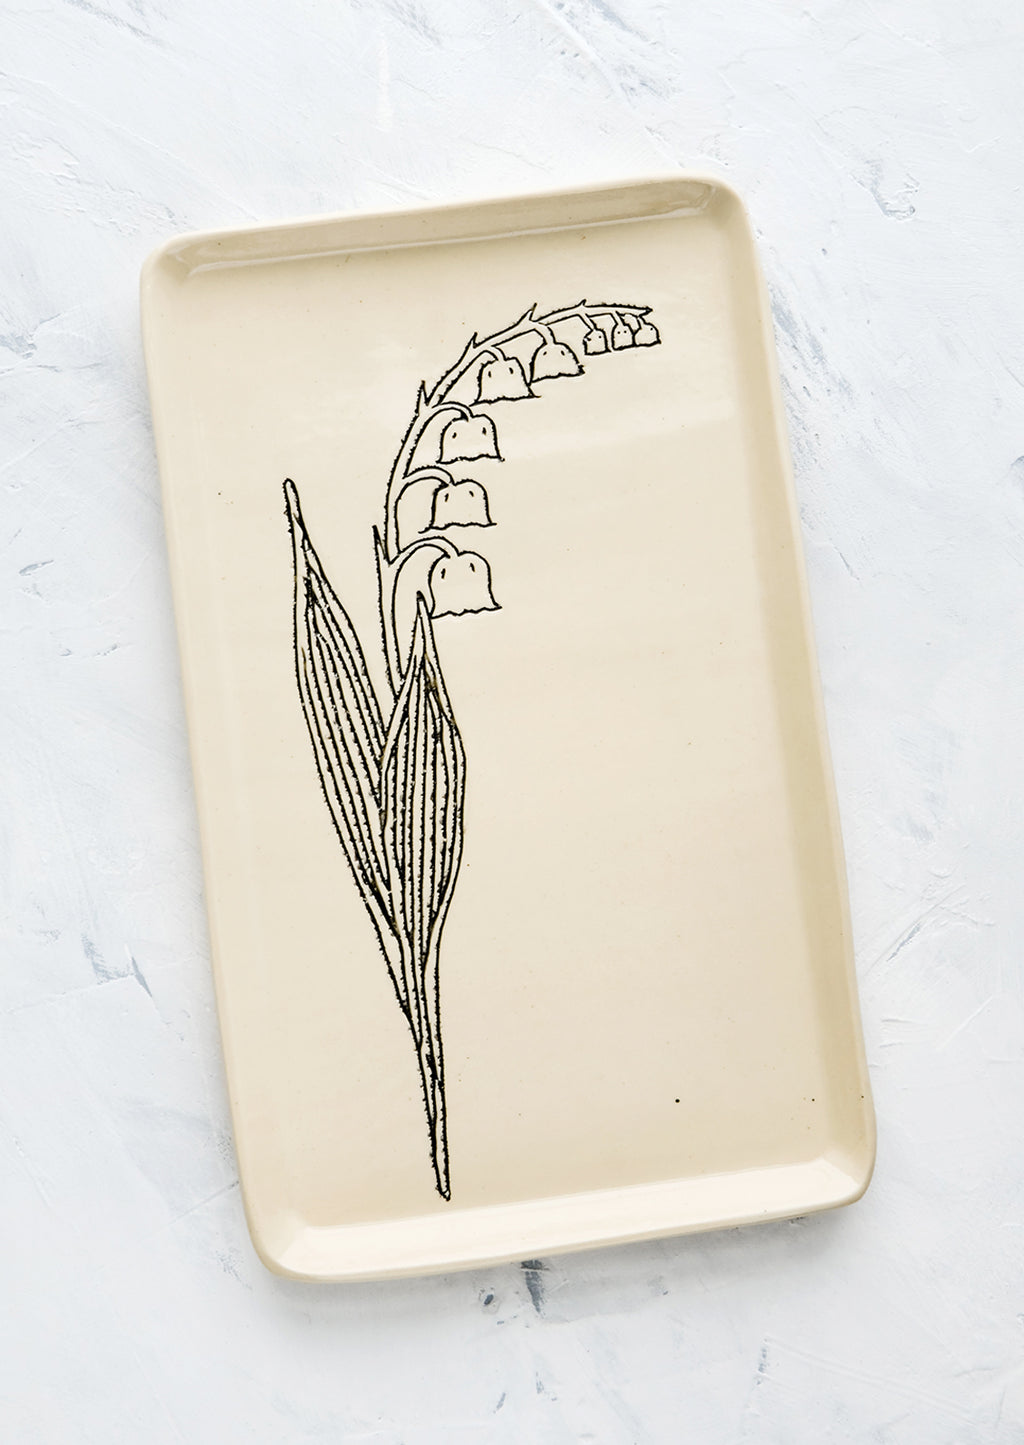 Lily of the Valley: A rectangular ceramic tray in natural bisque color with an etched black drawing of Lily Of the Valley flower.